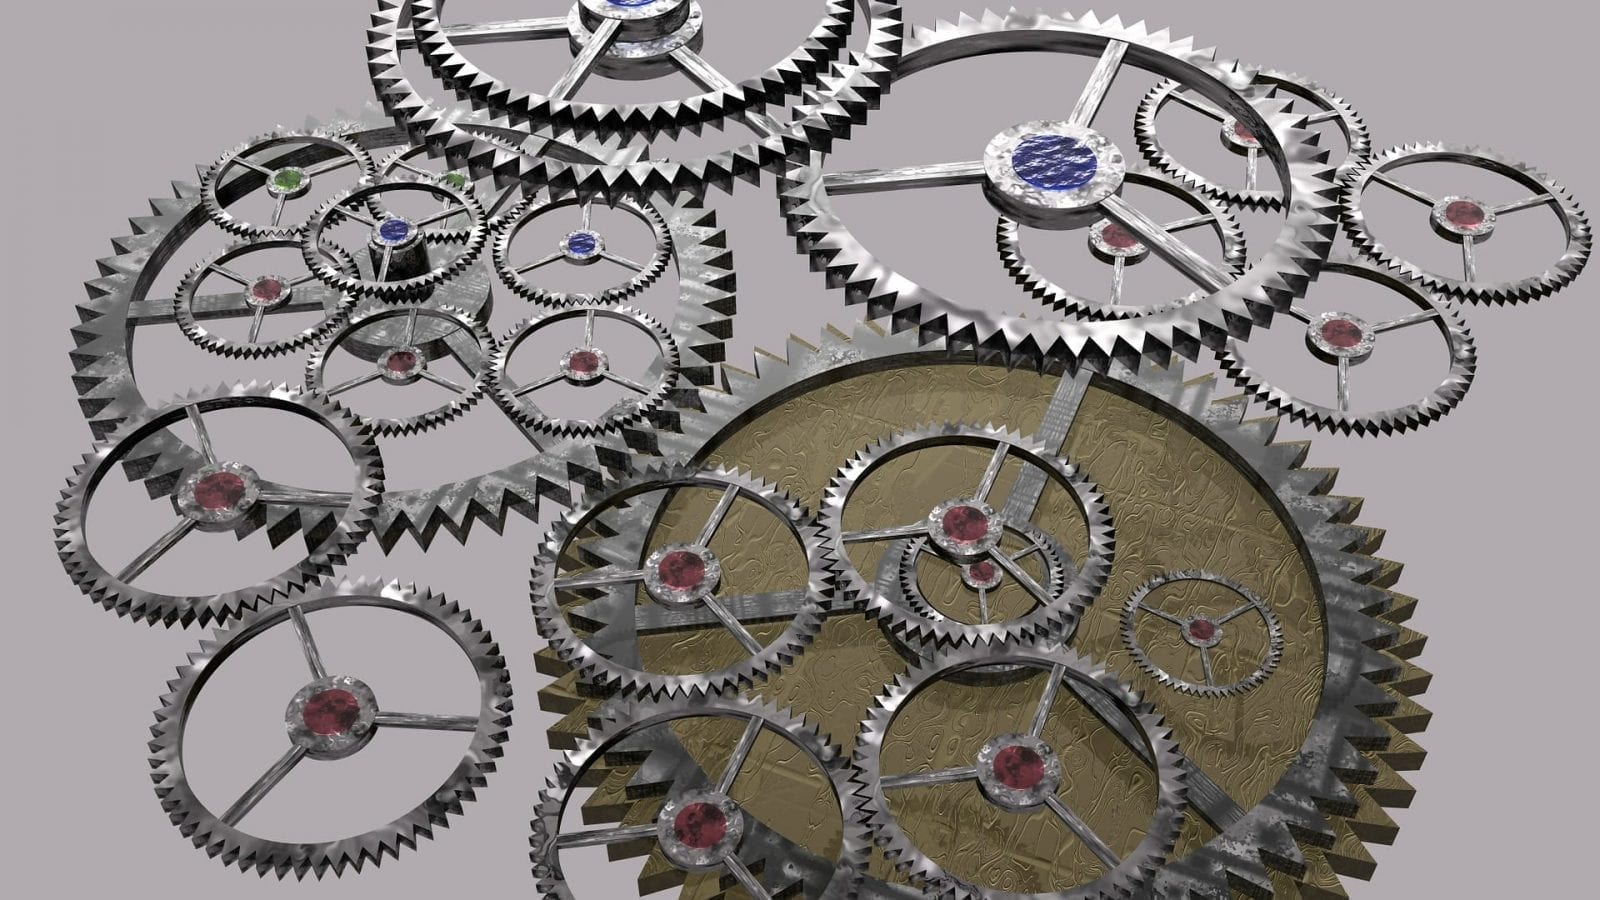 Gears and cogs working together